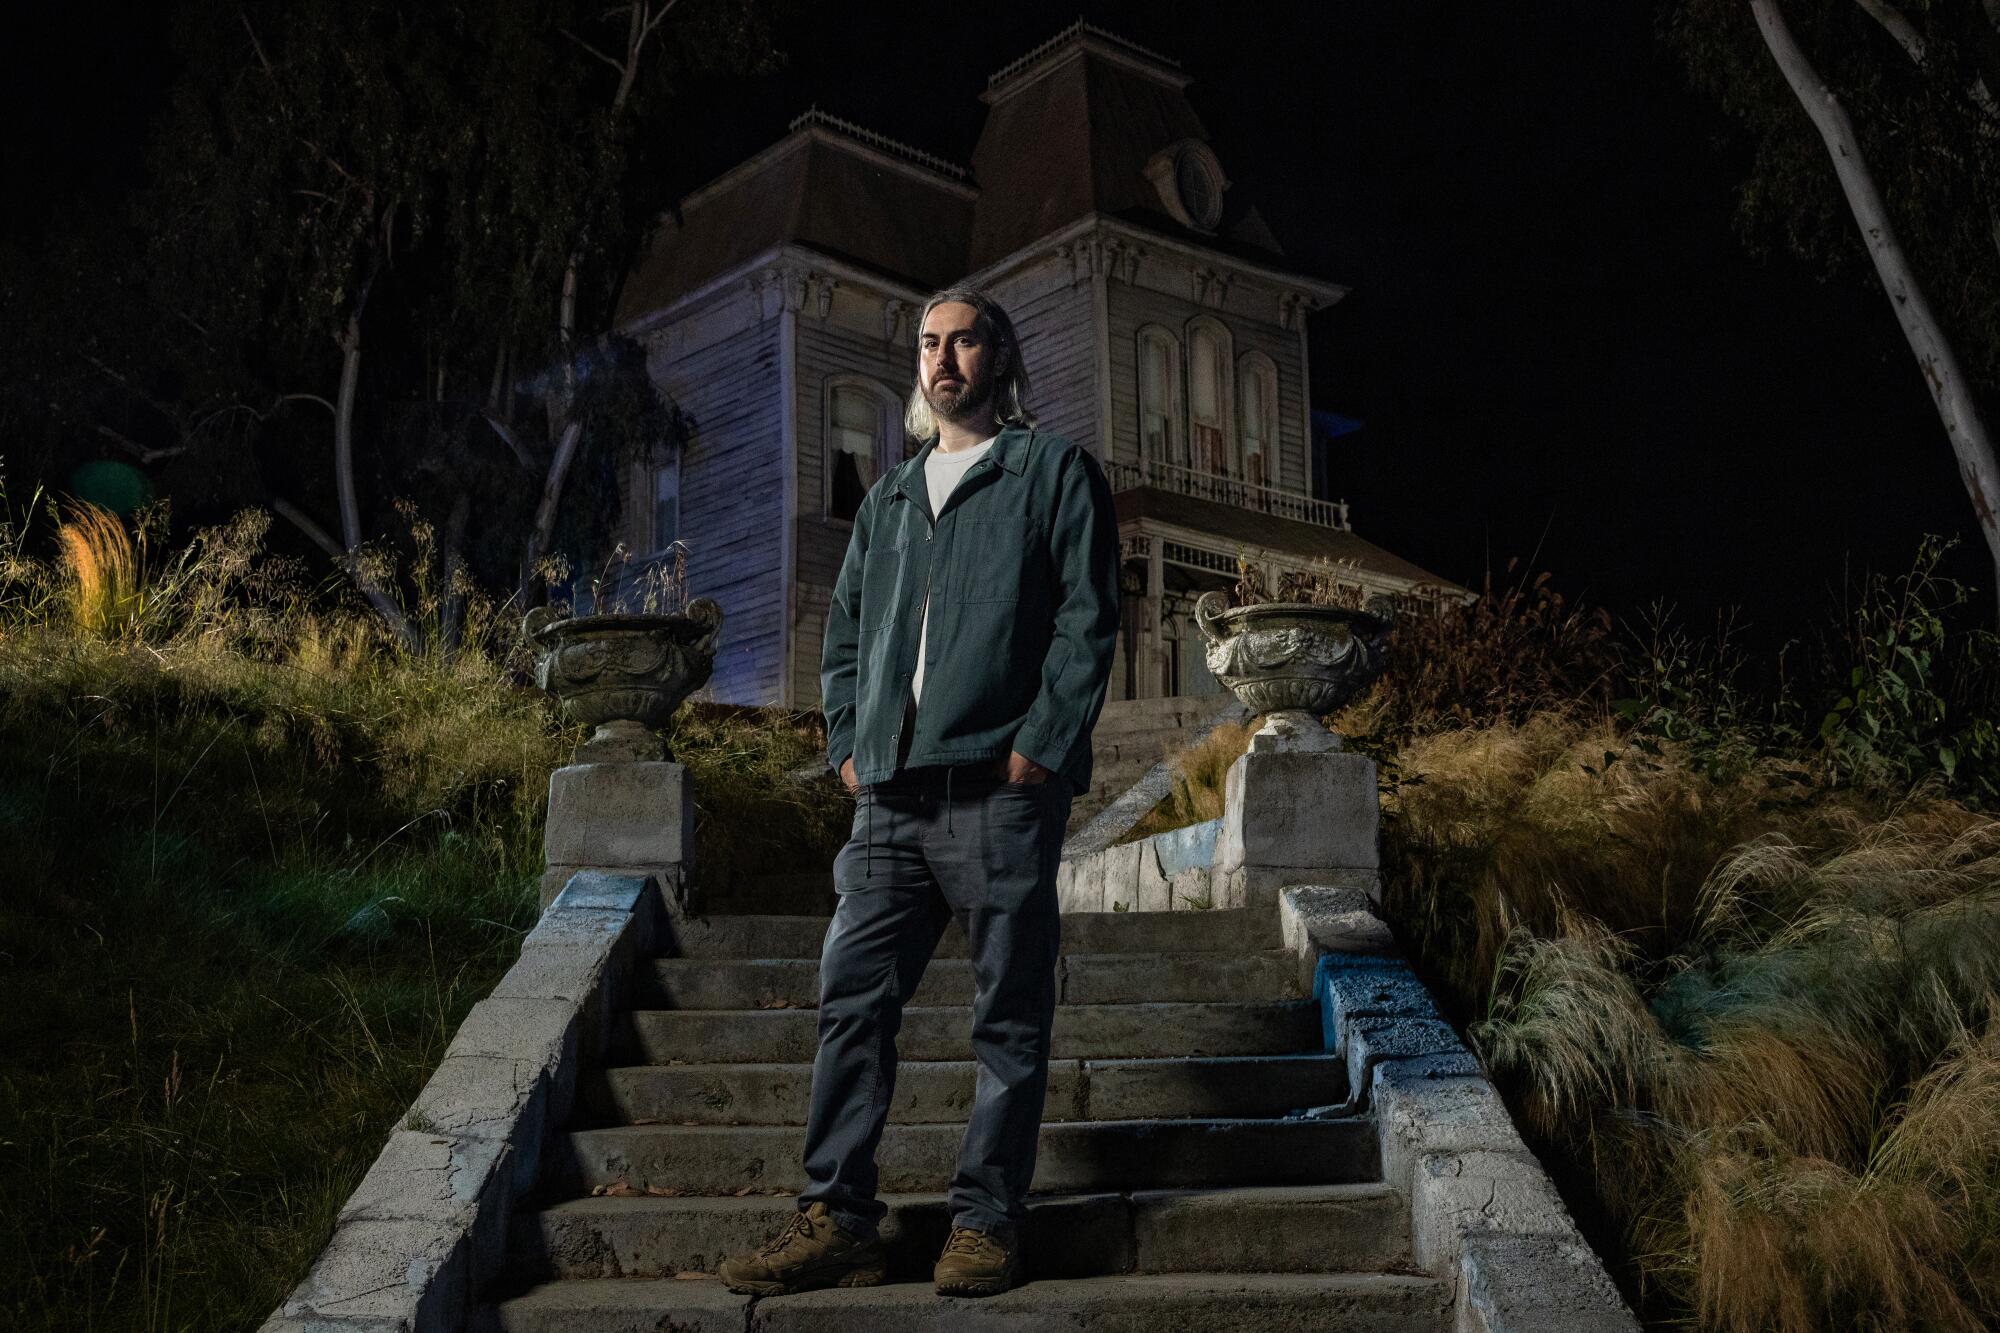 A man stands on the steps in front of a spooky gothic house at night.